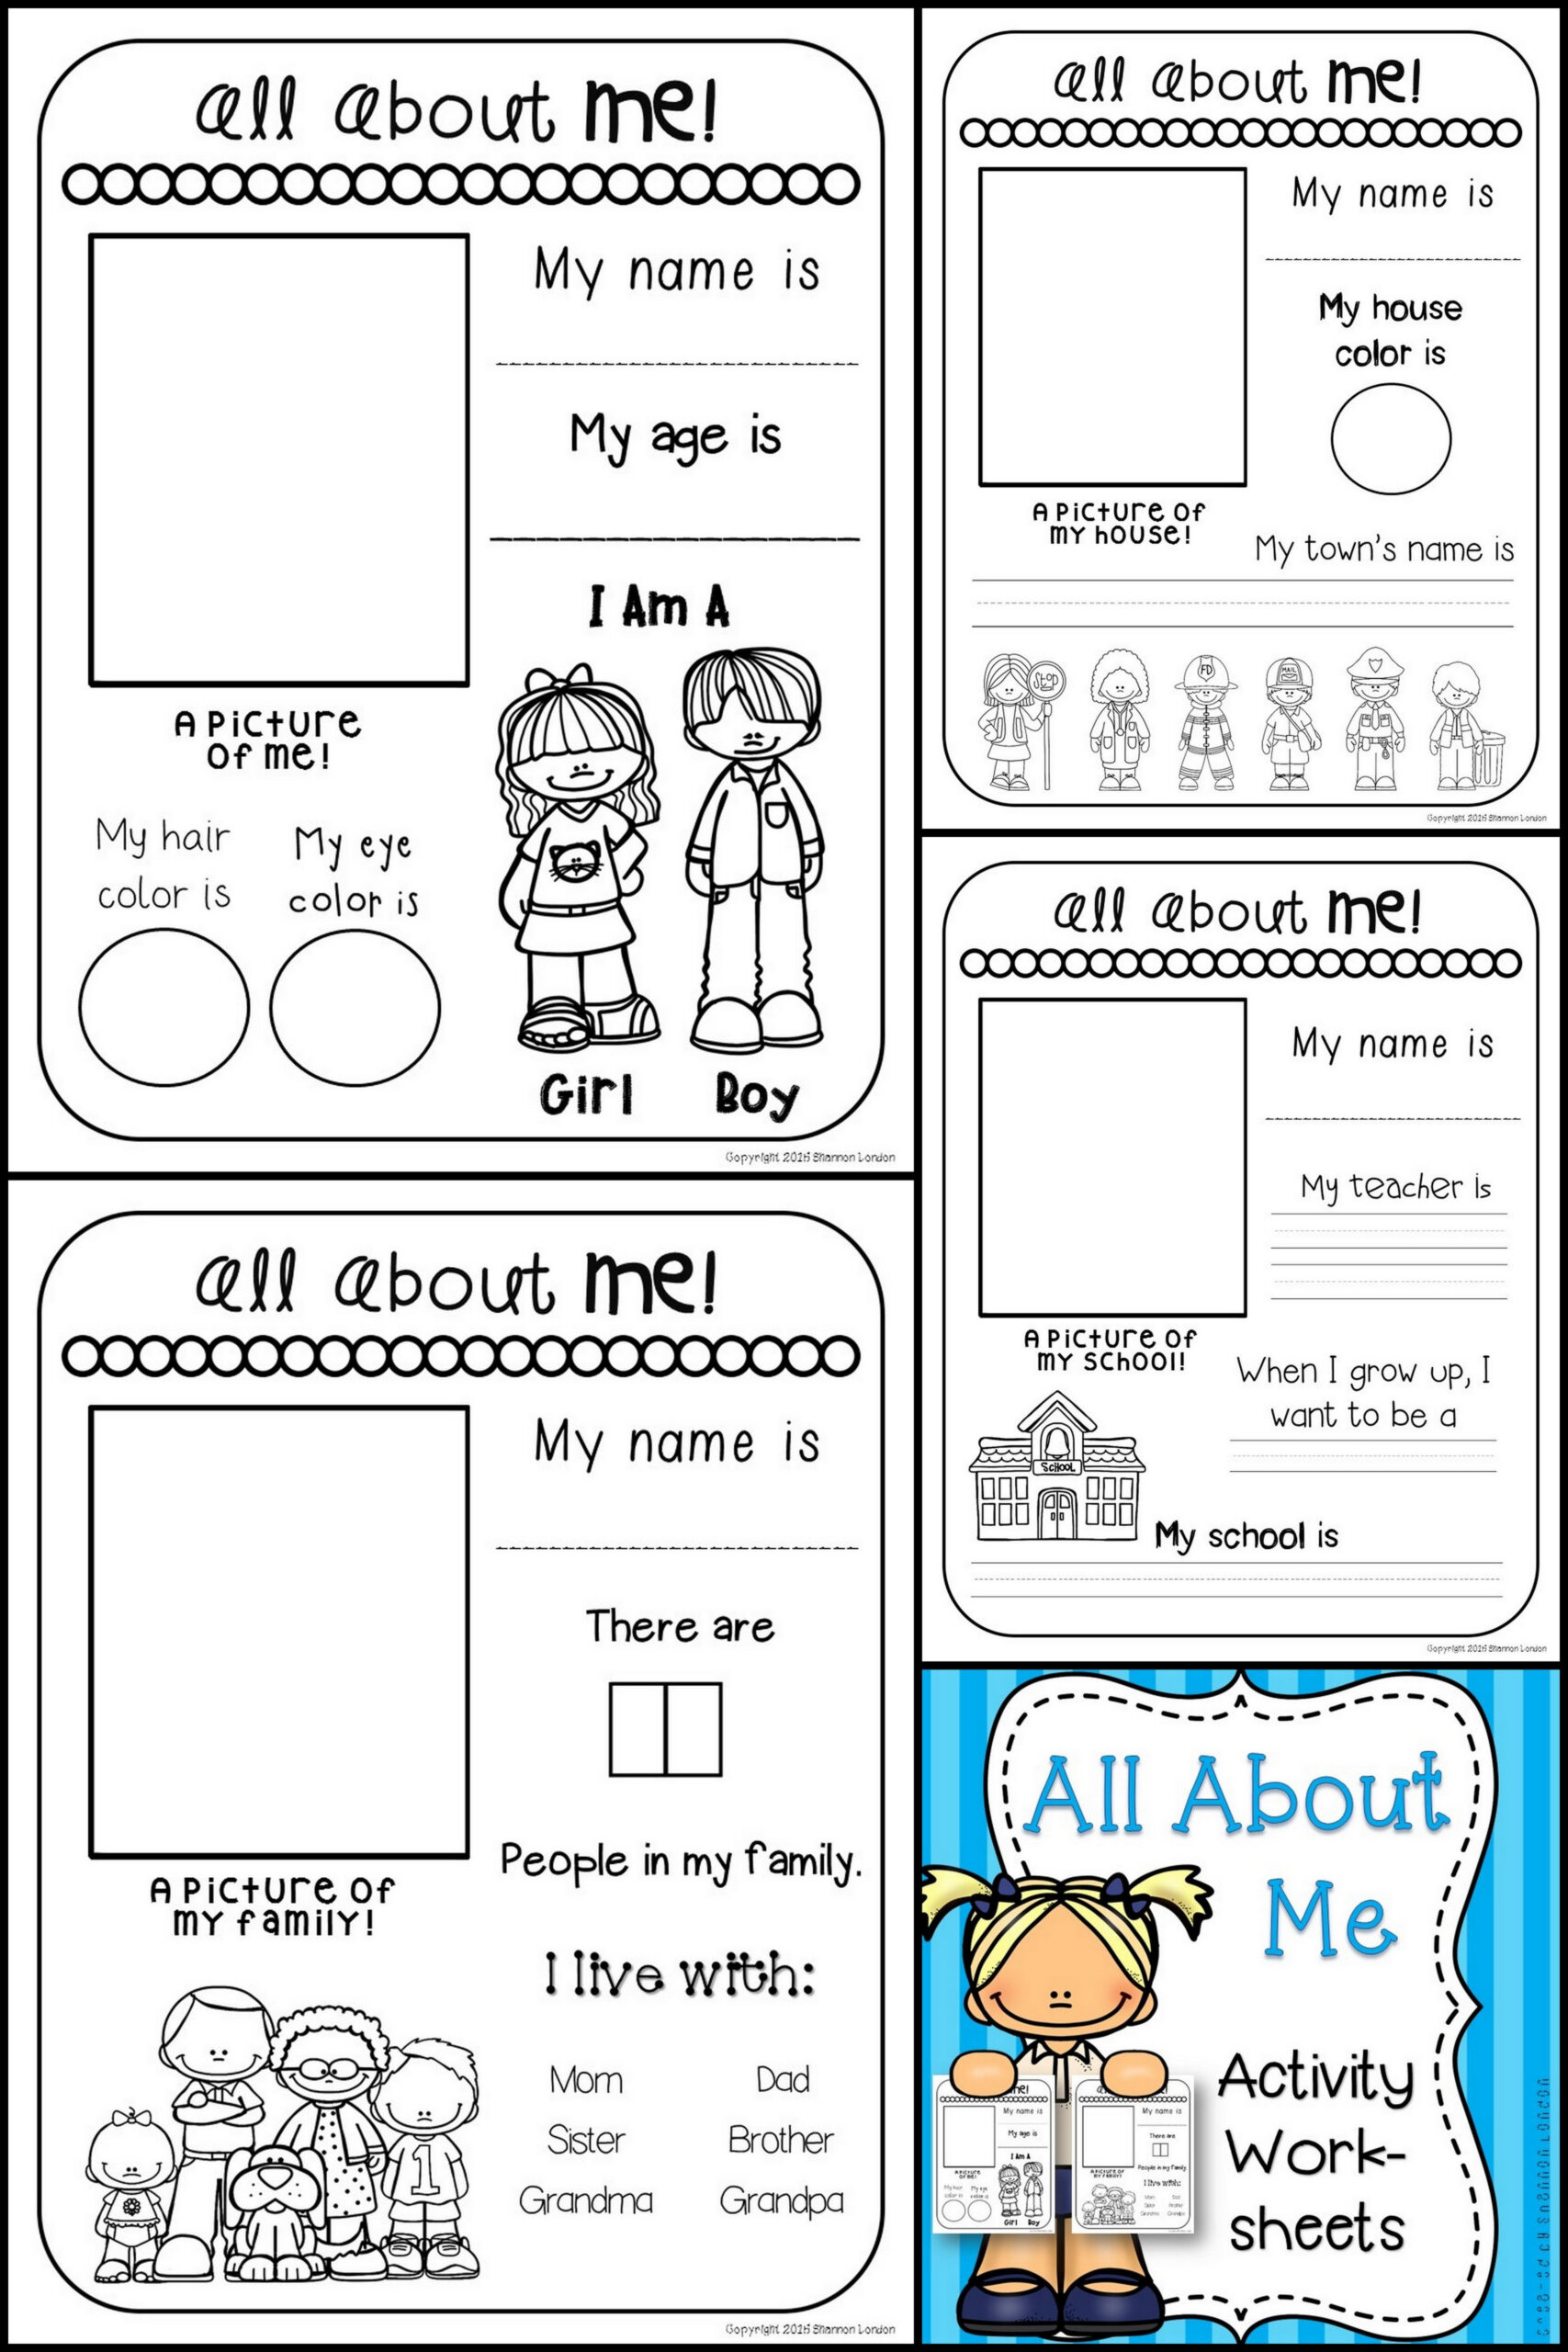 All About Me Worksheets All About Me Worksheet All About Me 